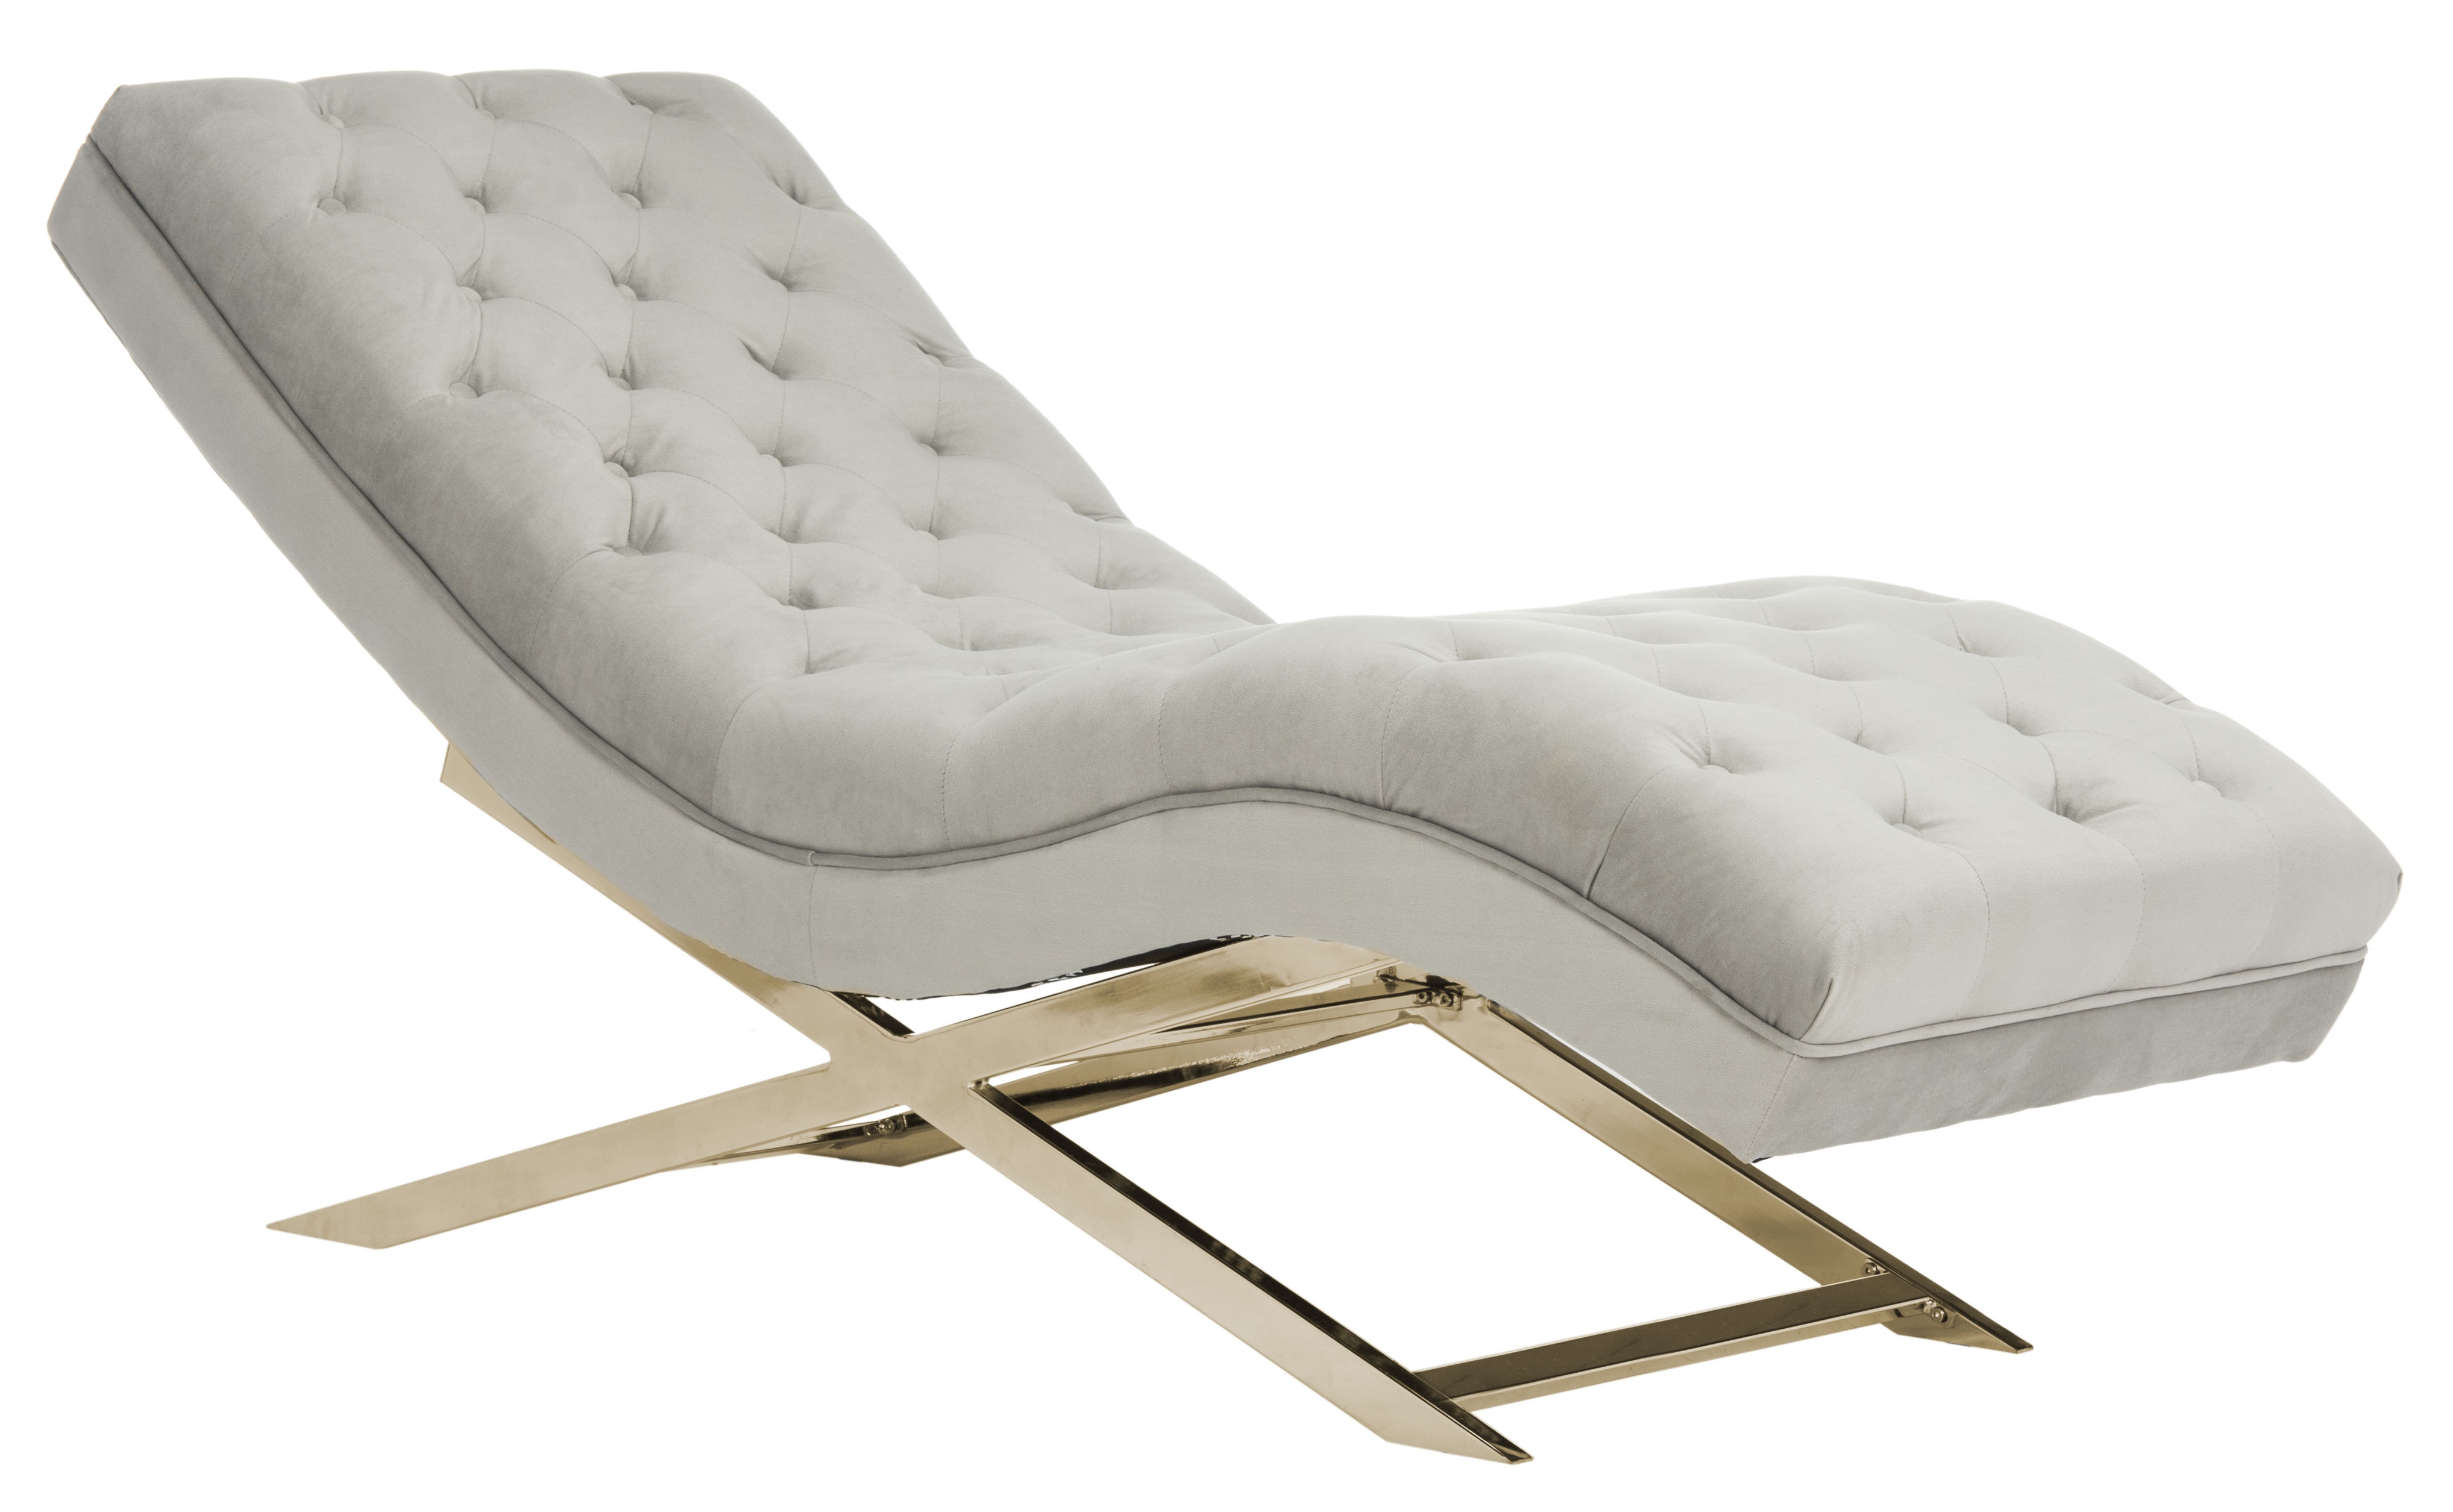 Monroe Chaise W/ Round Pillow - Grey/Gold - Arlo Home - Image 2